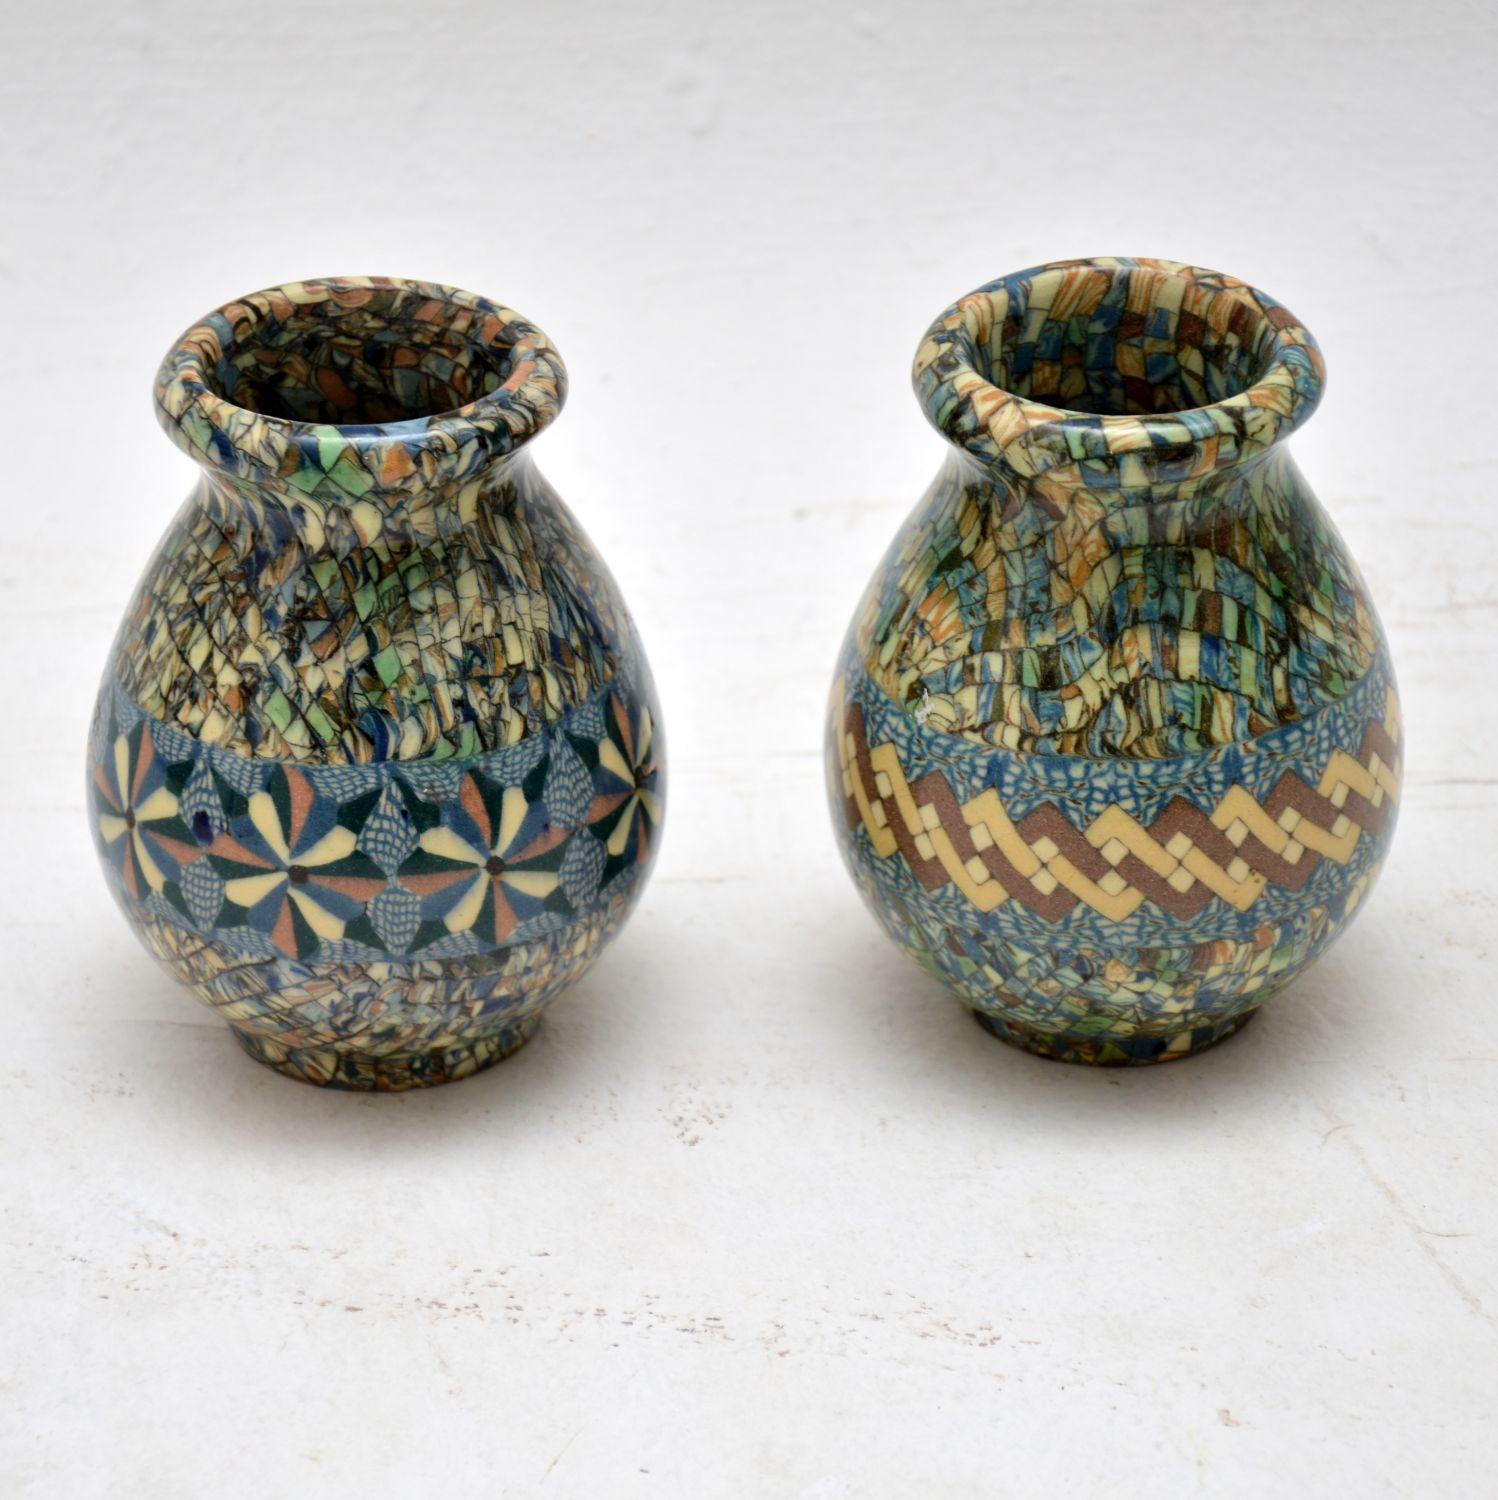 A beautiful pair of ceramic ‘Mosaic’ vases, these were designed by Jean Gerbino and were made by Vallauris in France in the 1960s. They are signed on the undersides, and they are in superb condition, with no wear or damage to be seen.

Measures: